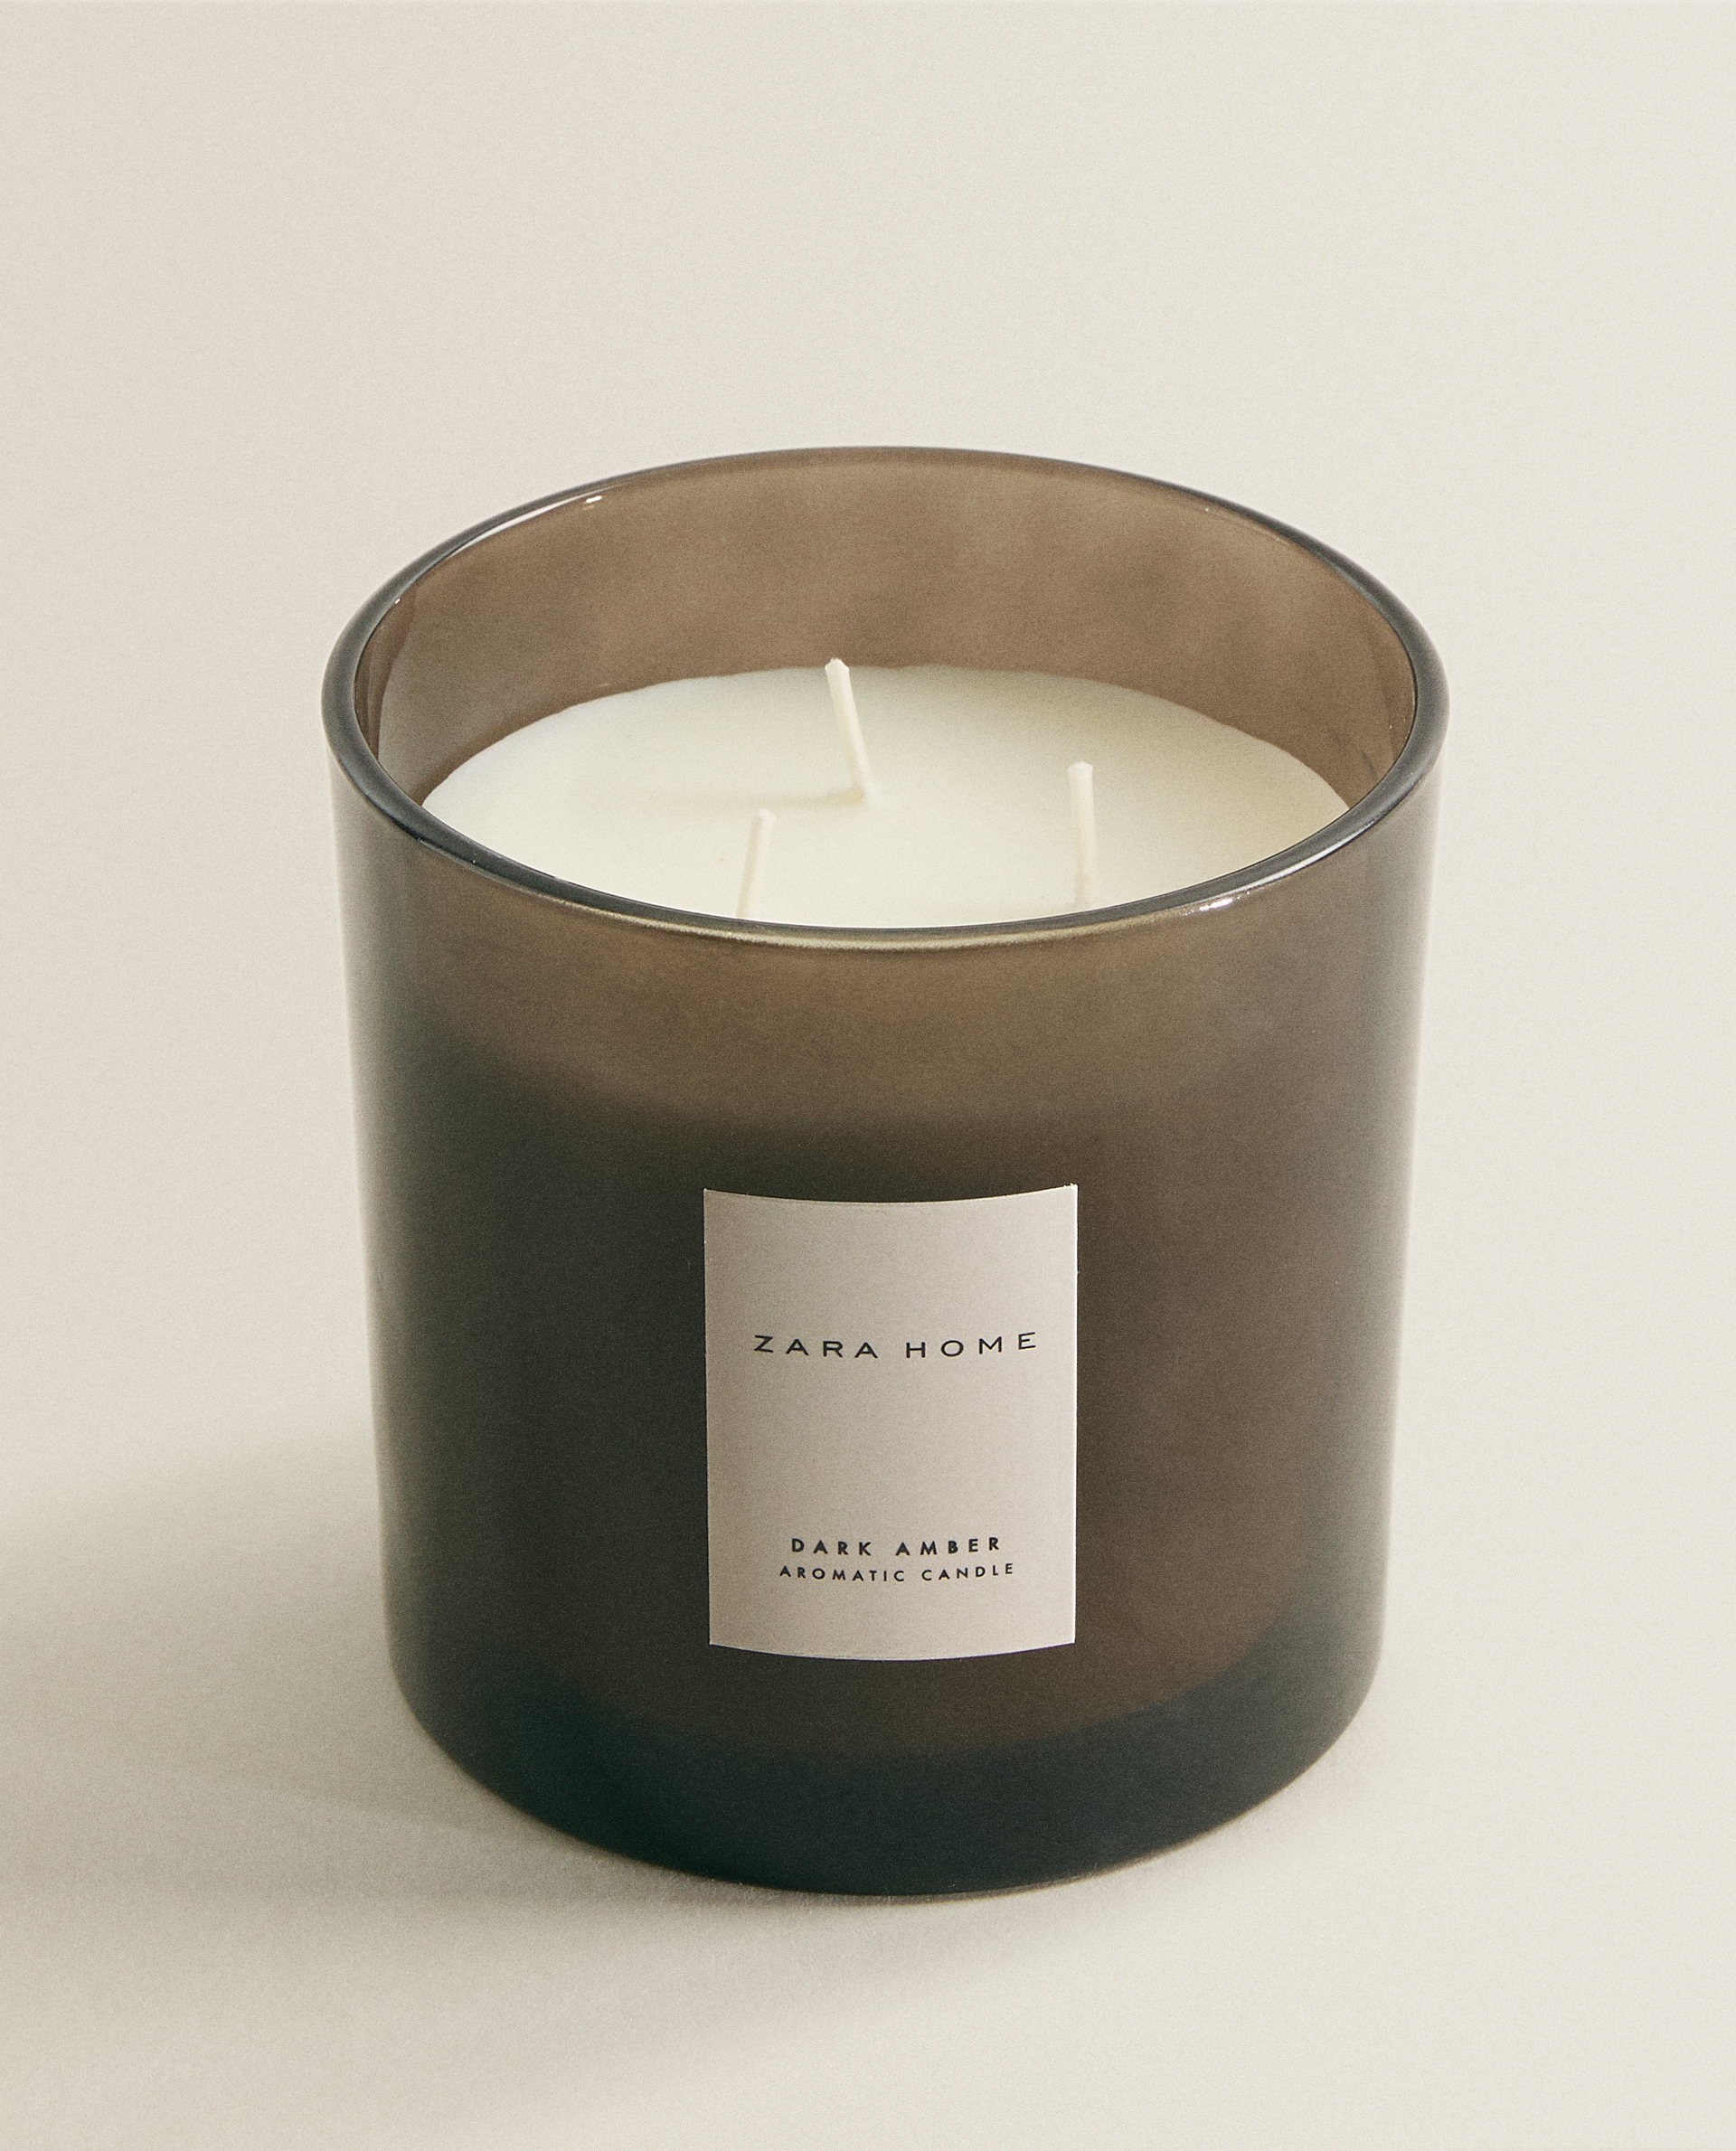 620 G) DARK AMBER SCENTED CANDLE 